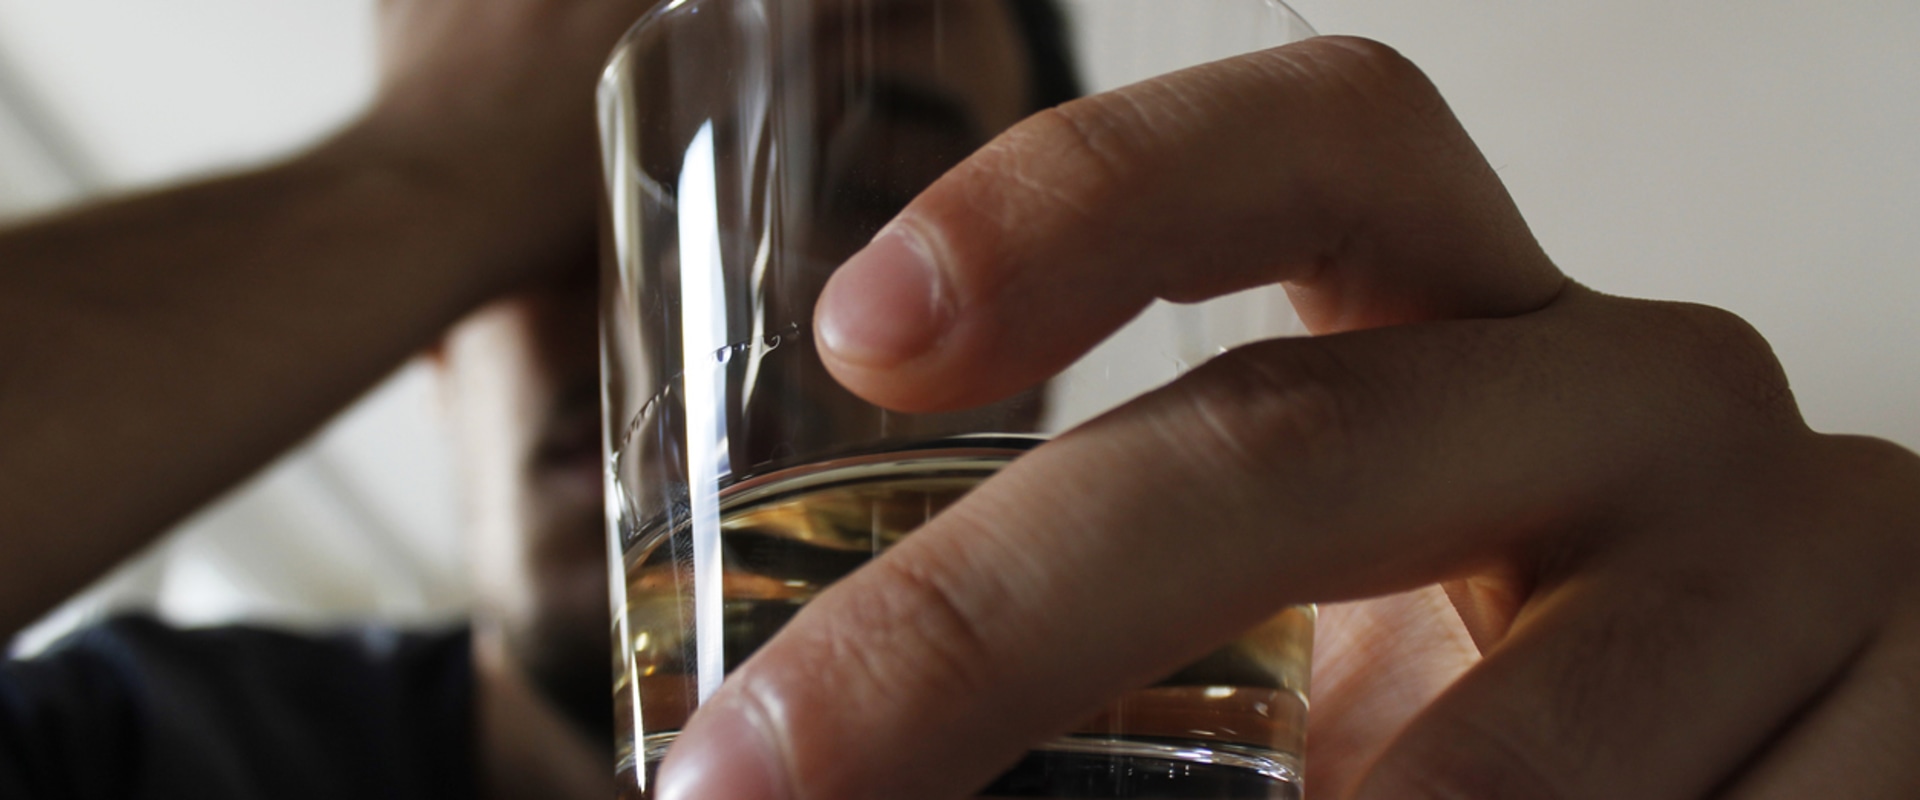 Understanding Binge Drinking and its Effects